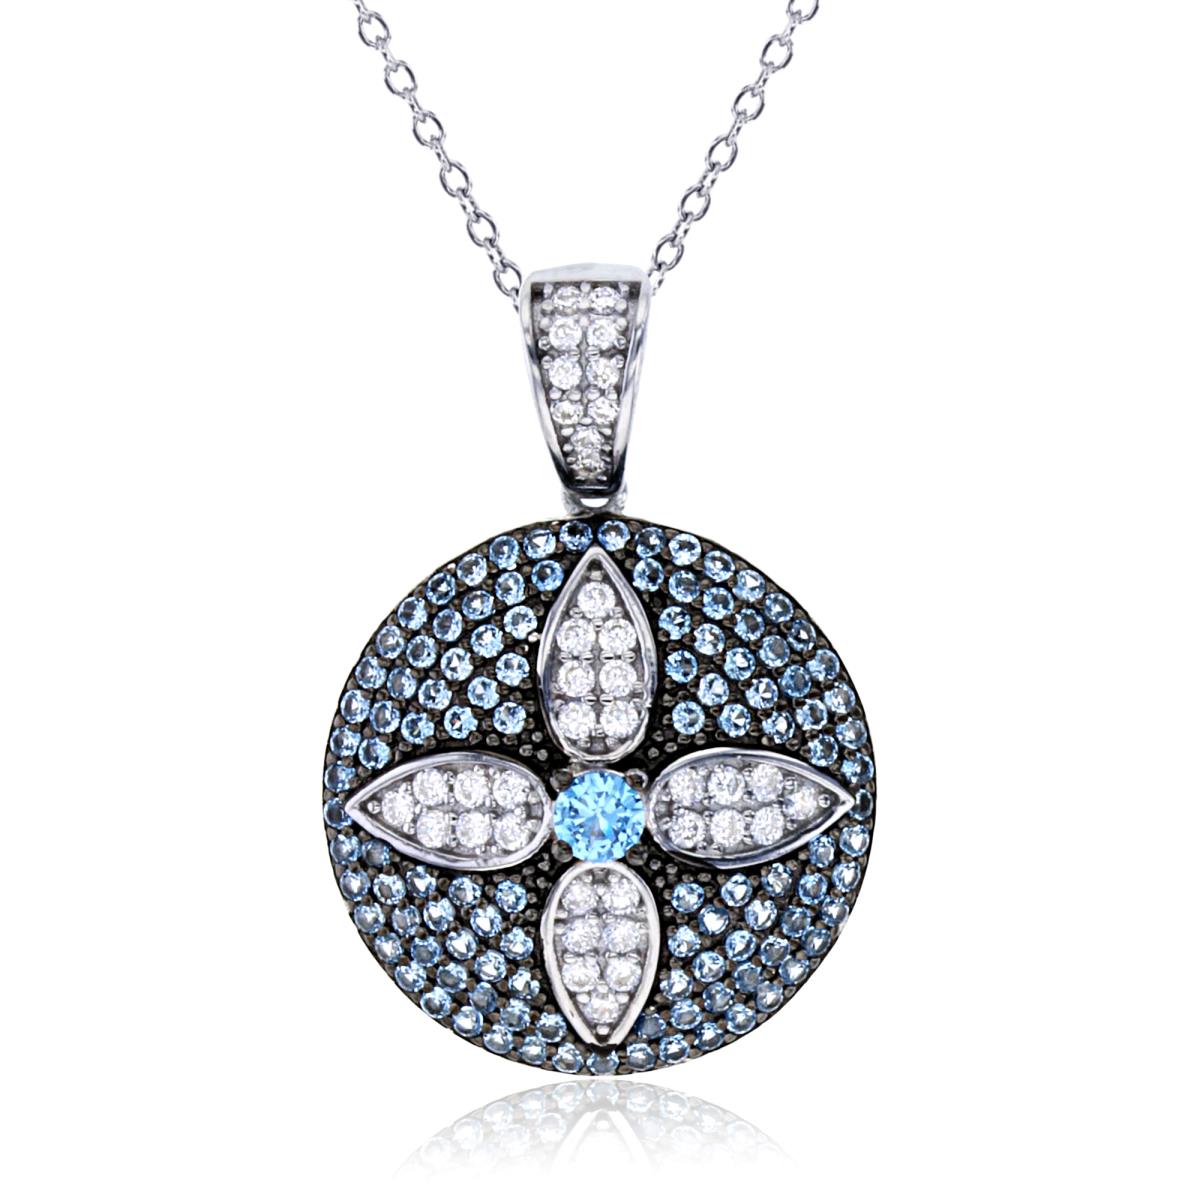 Sterling Silver Two-Tone Rnd White & #119 Blue CZ Pave Flower on Round 18"Necklace